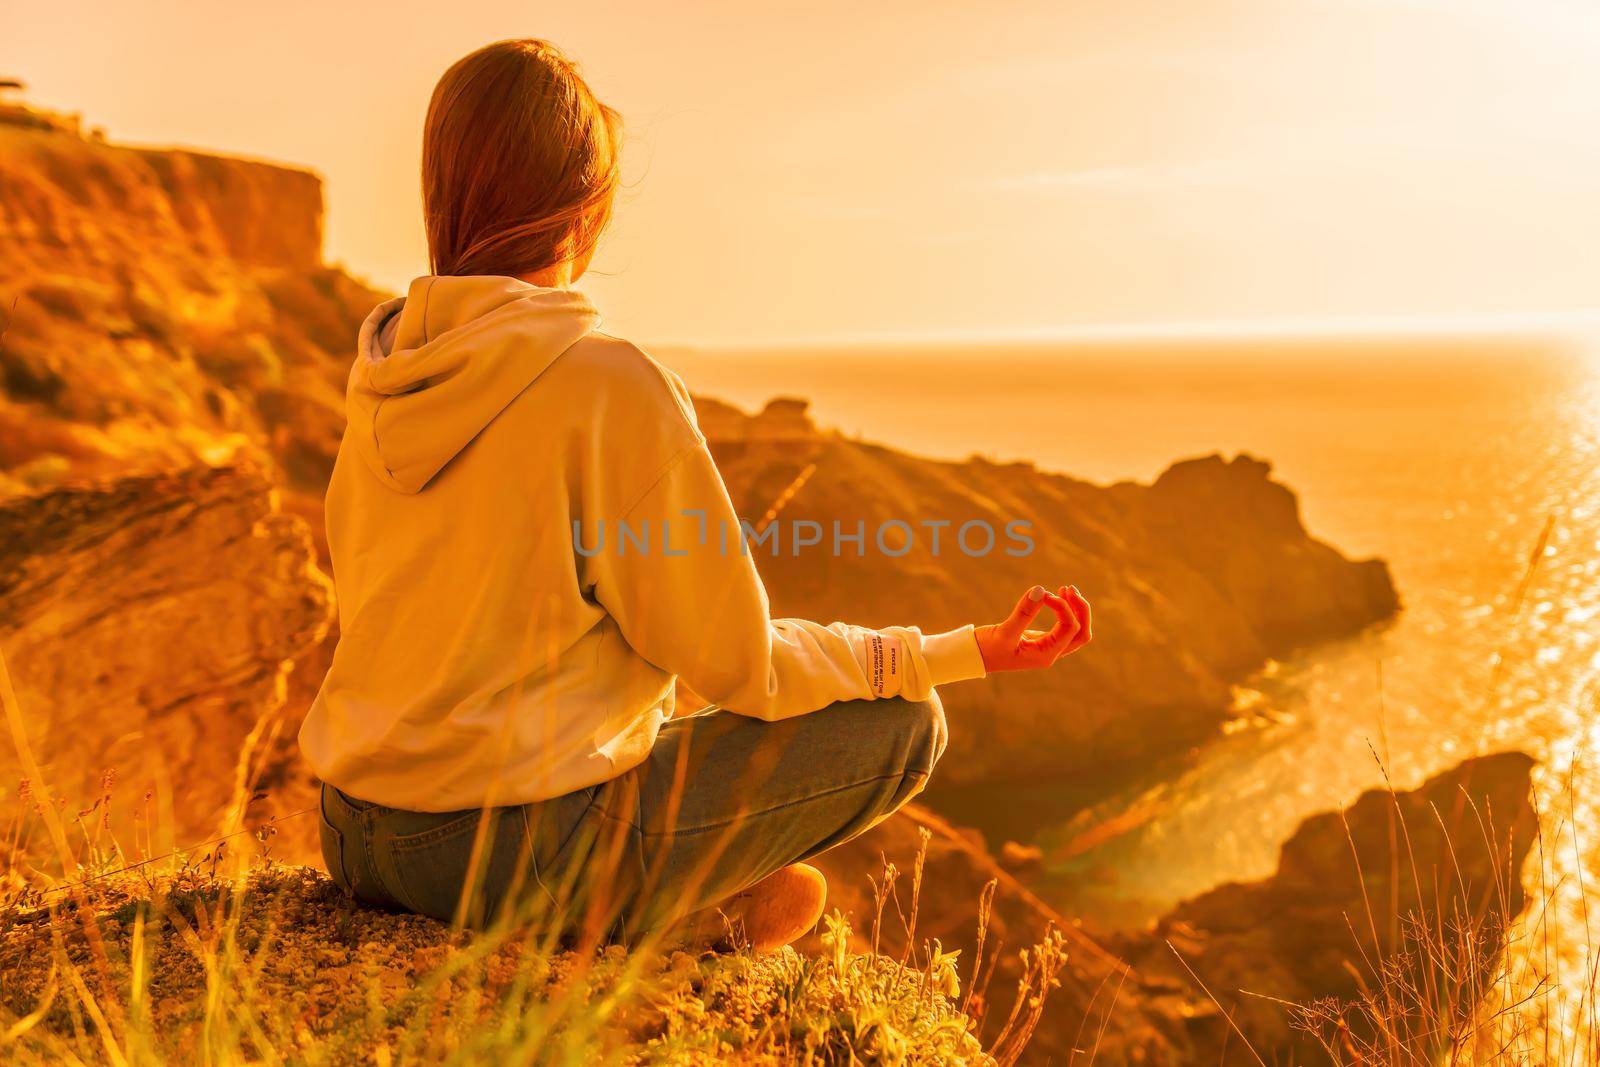 woman traveler drinks coffee with a view of the mountain landscape. A young tourist woman drinks a hot drink from a cup and enjoys the scenery in the mountains. Trekking concept